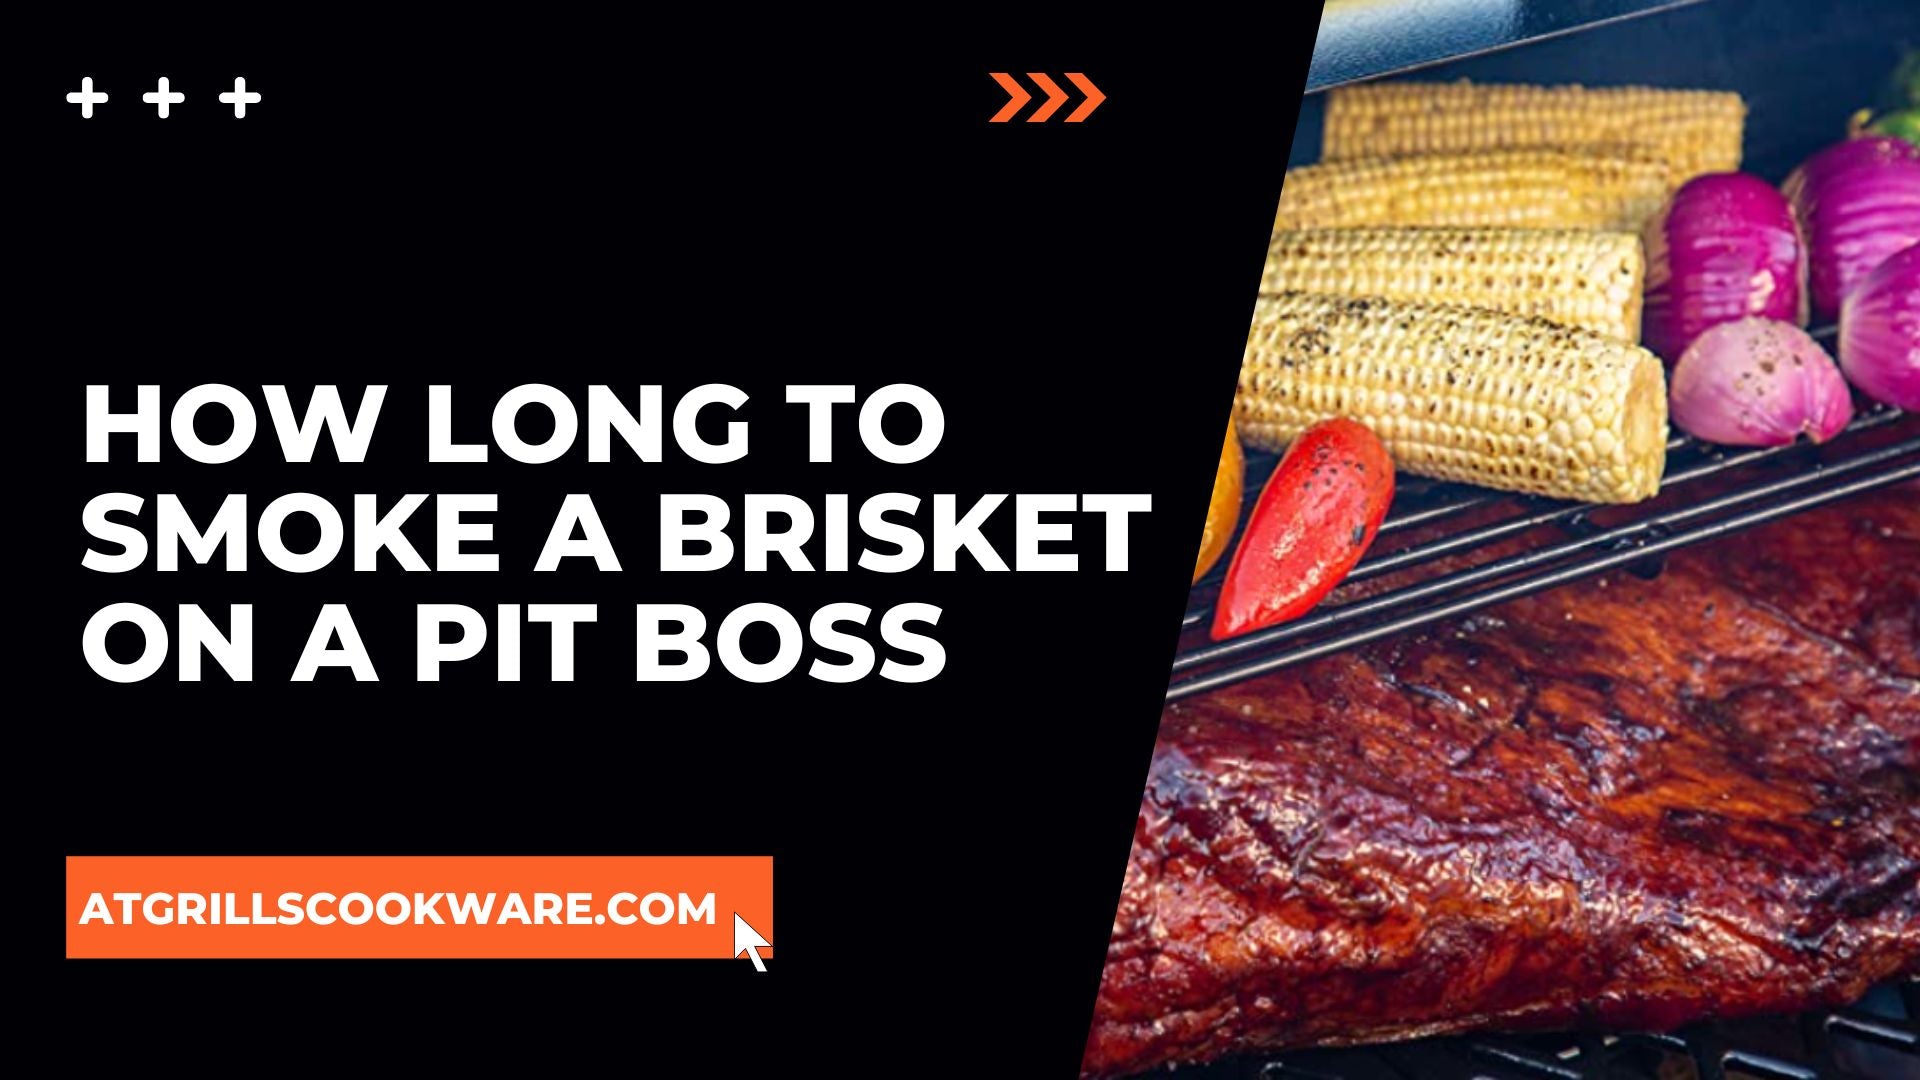 How Long to Smoke a Brisket on a Pit Boss